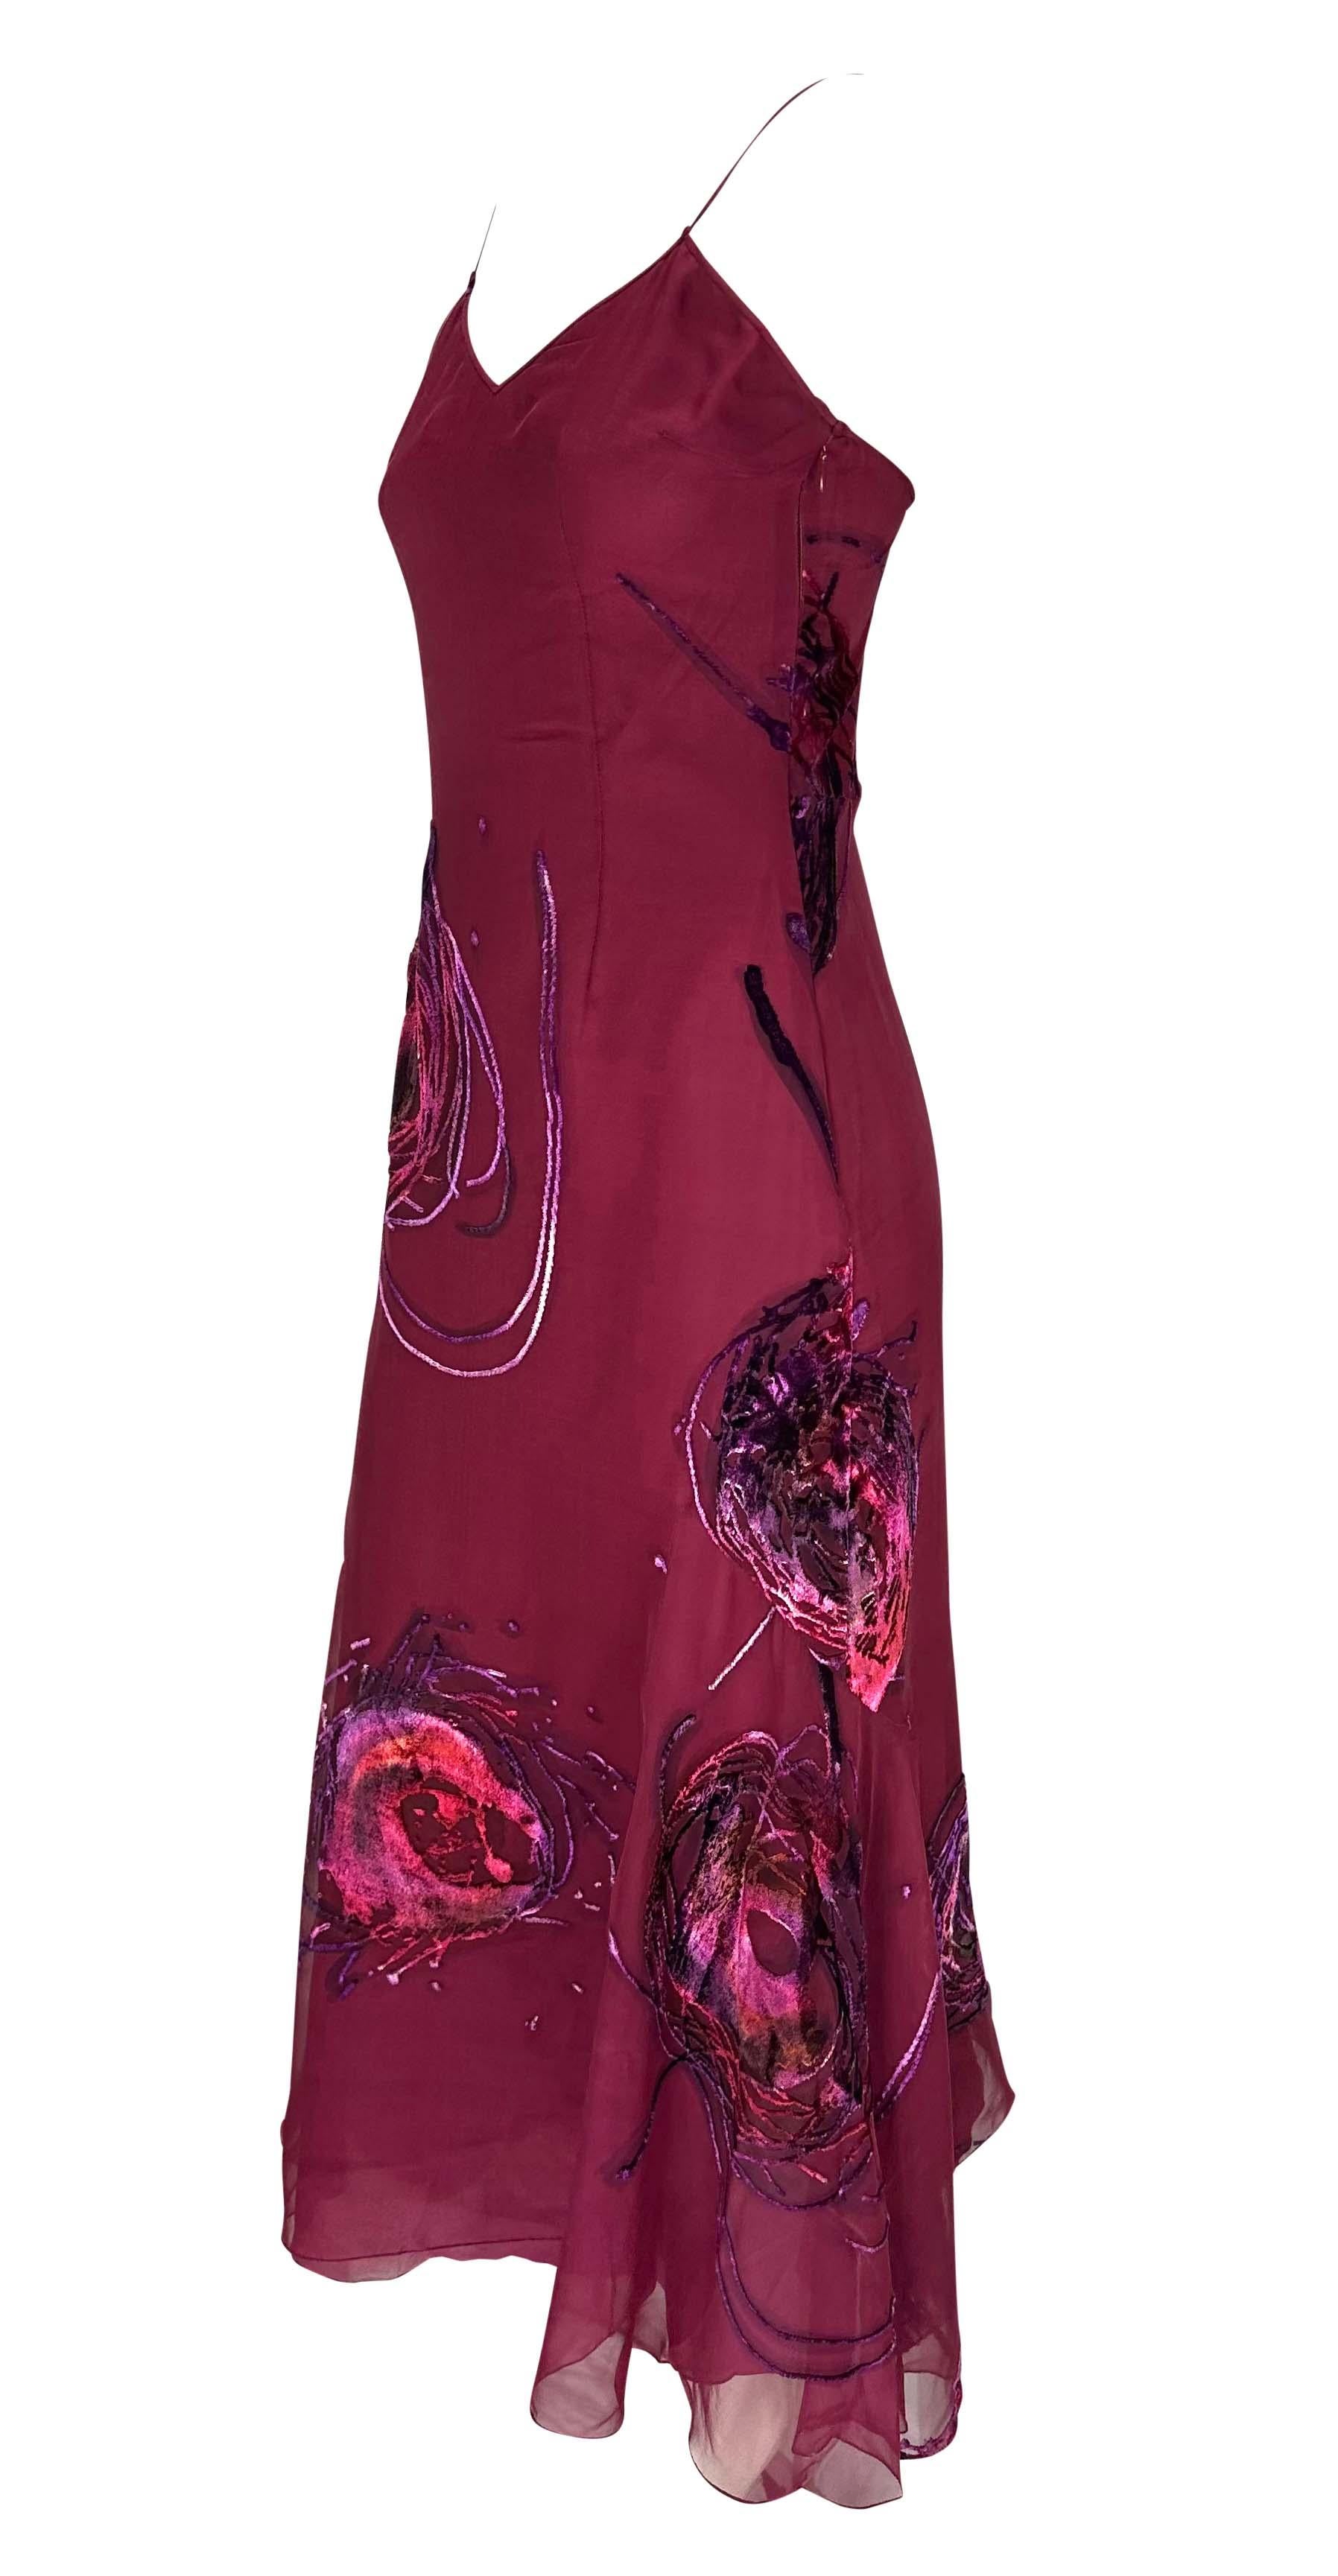 S/S 2001 Christian Dior by John Galliano Dyed Velvet Abstract Maroon ...